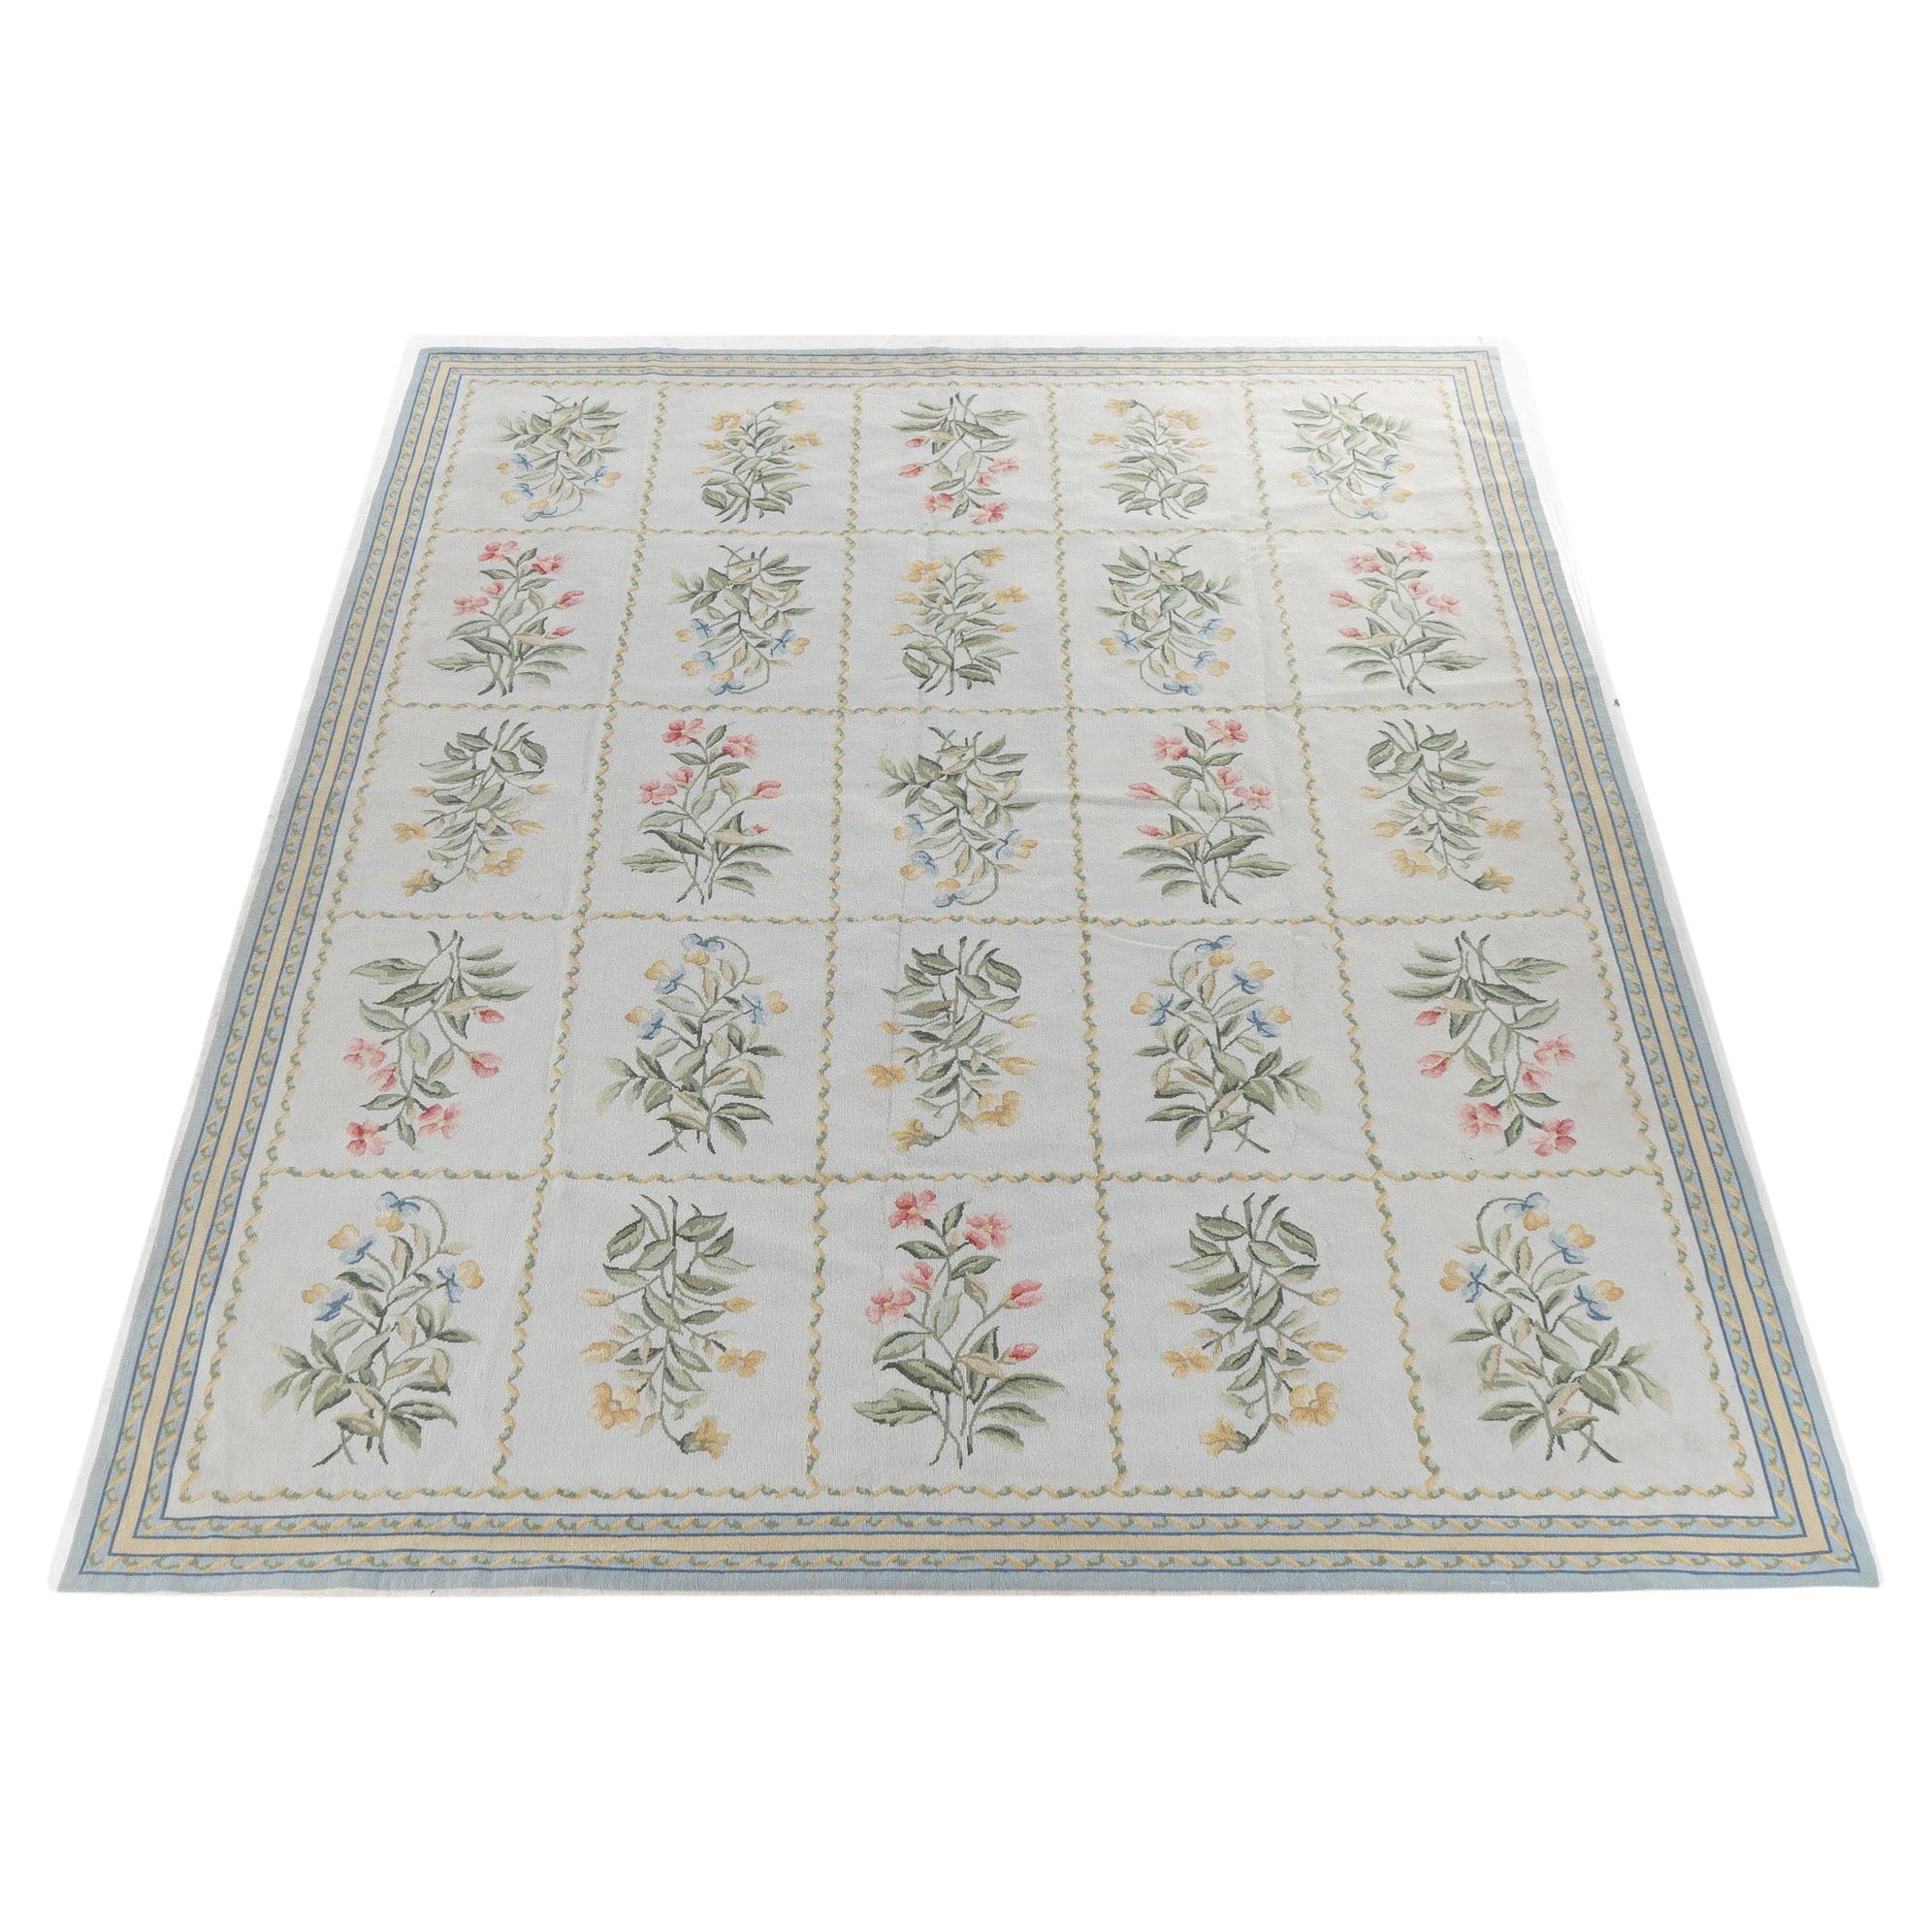 French Aubusson Needlepoint Room Size Paneled Floral Garden Wool Rug 20th C For Sale